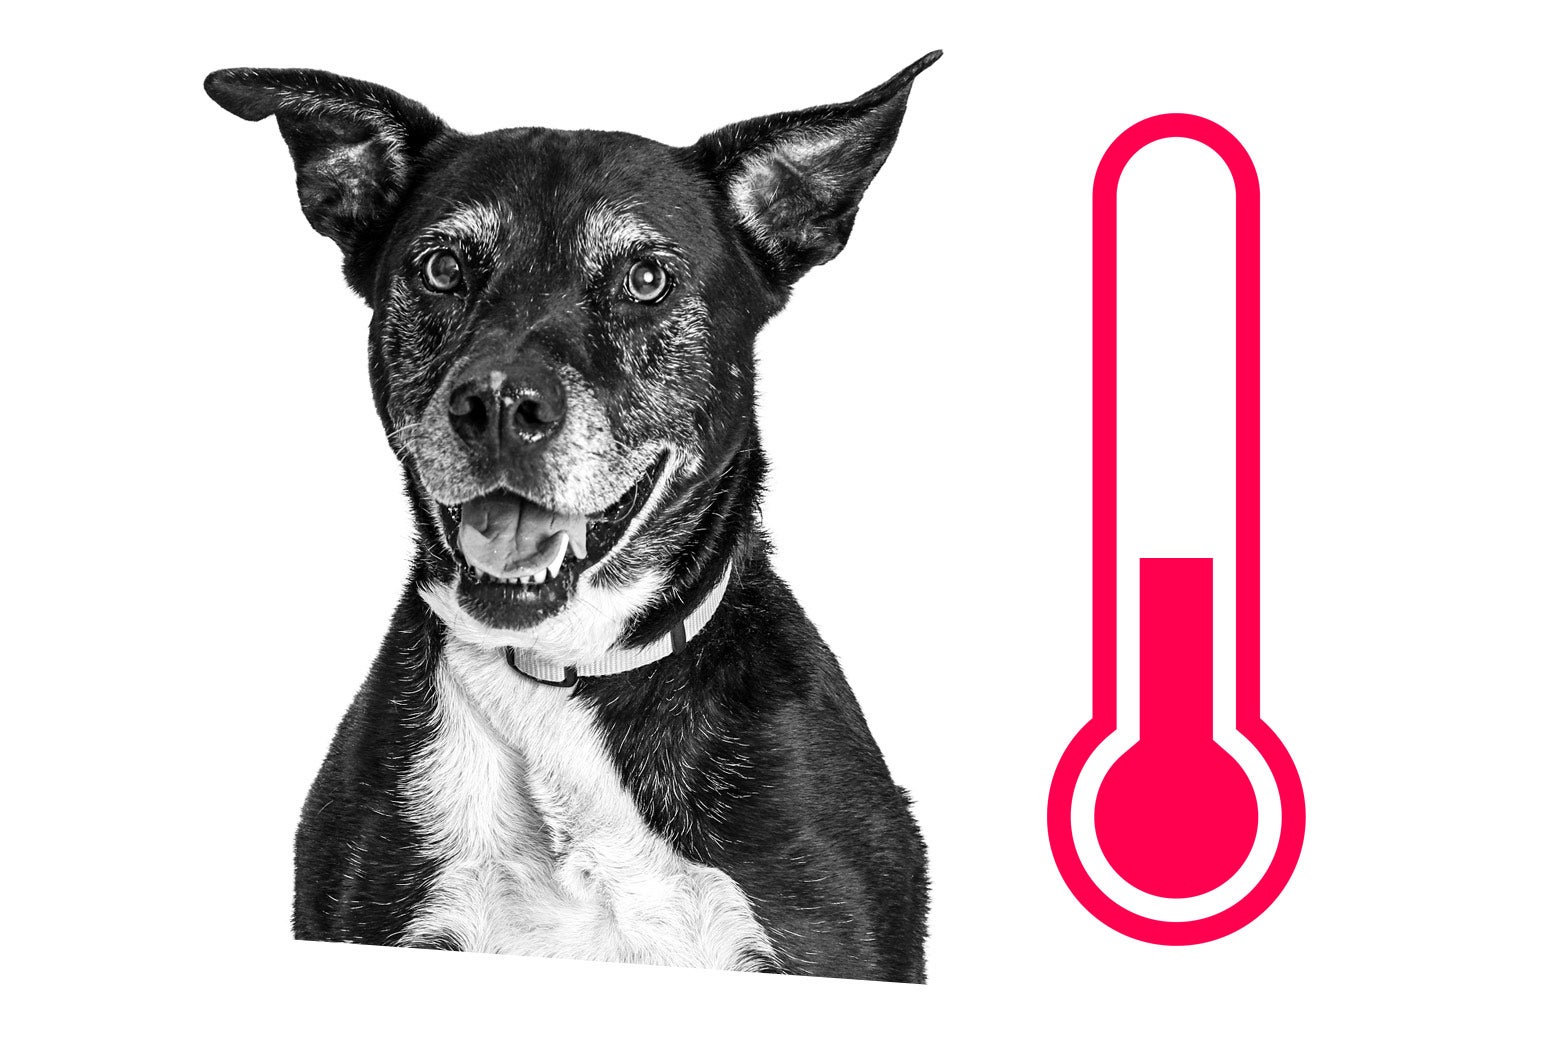 A dog next to a thermometer with a low temp reading.